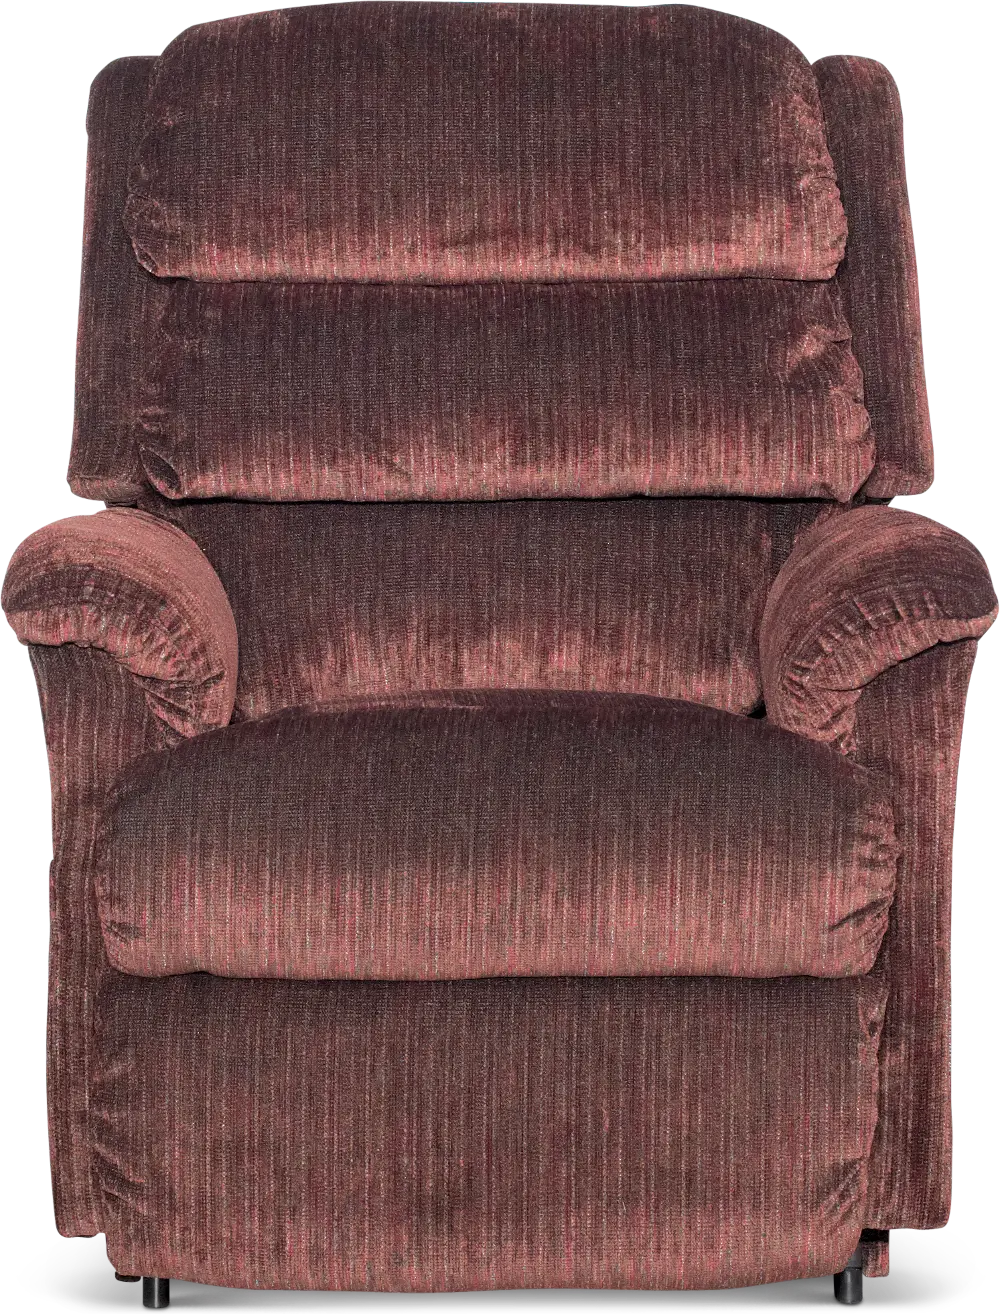 1PH-519/C993409 Melody Bordeaux Red Lift Chair - Astor-1